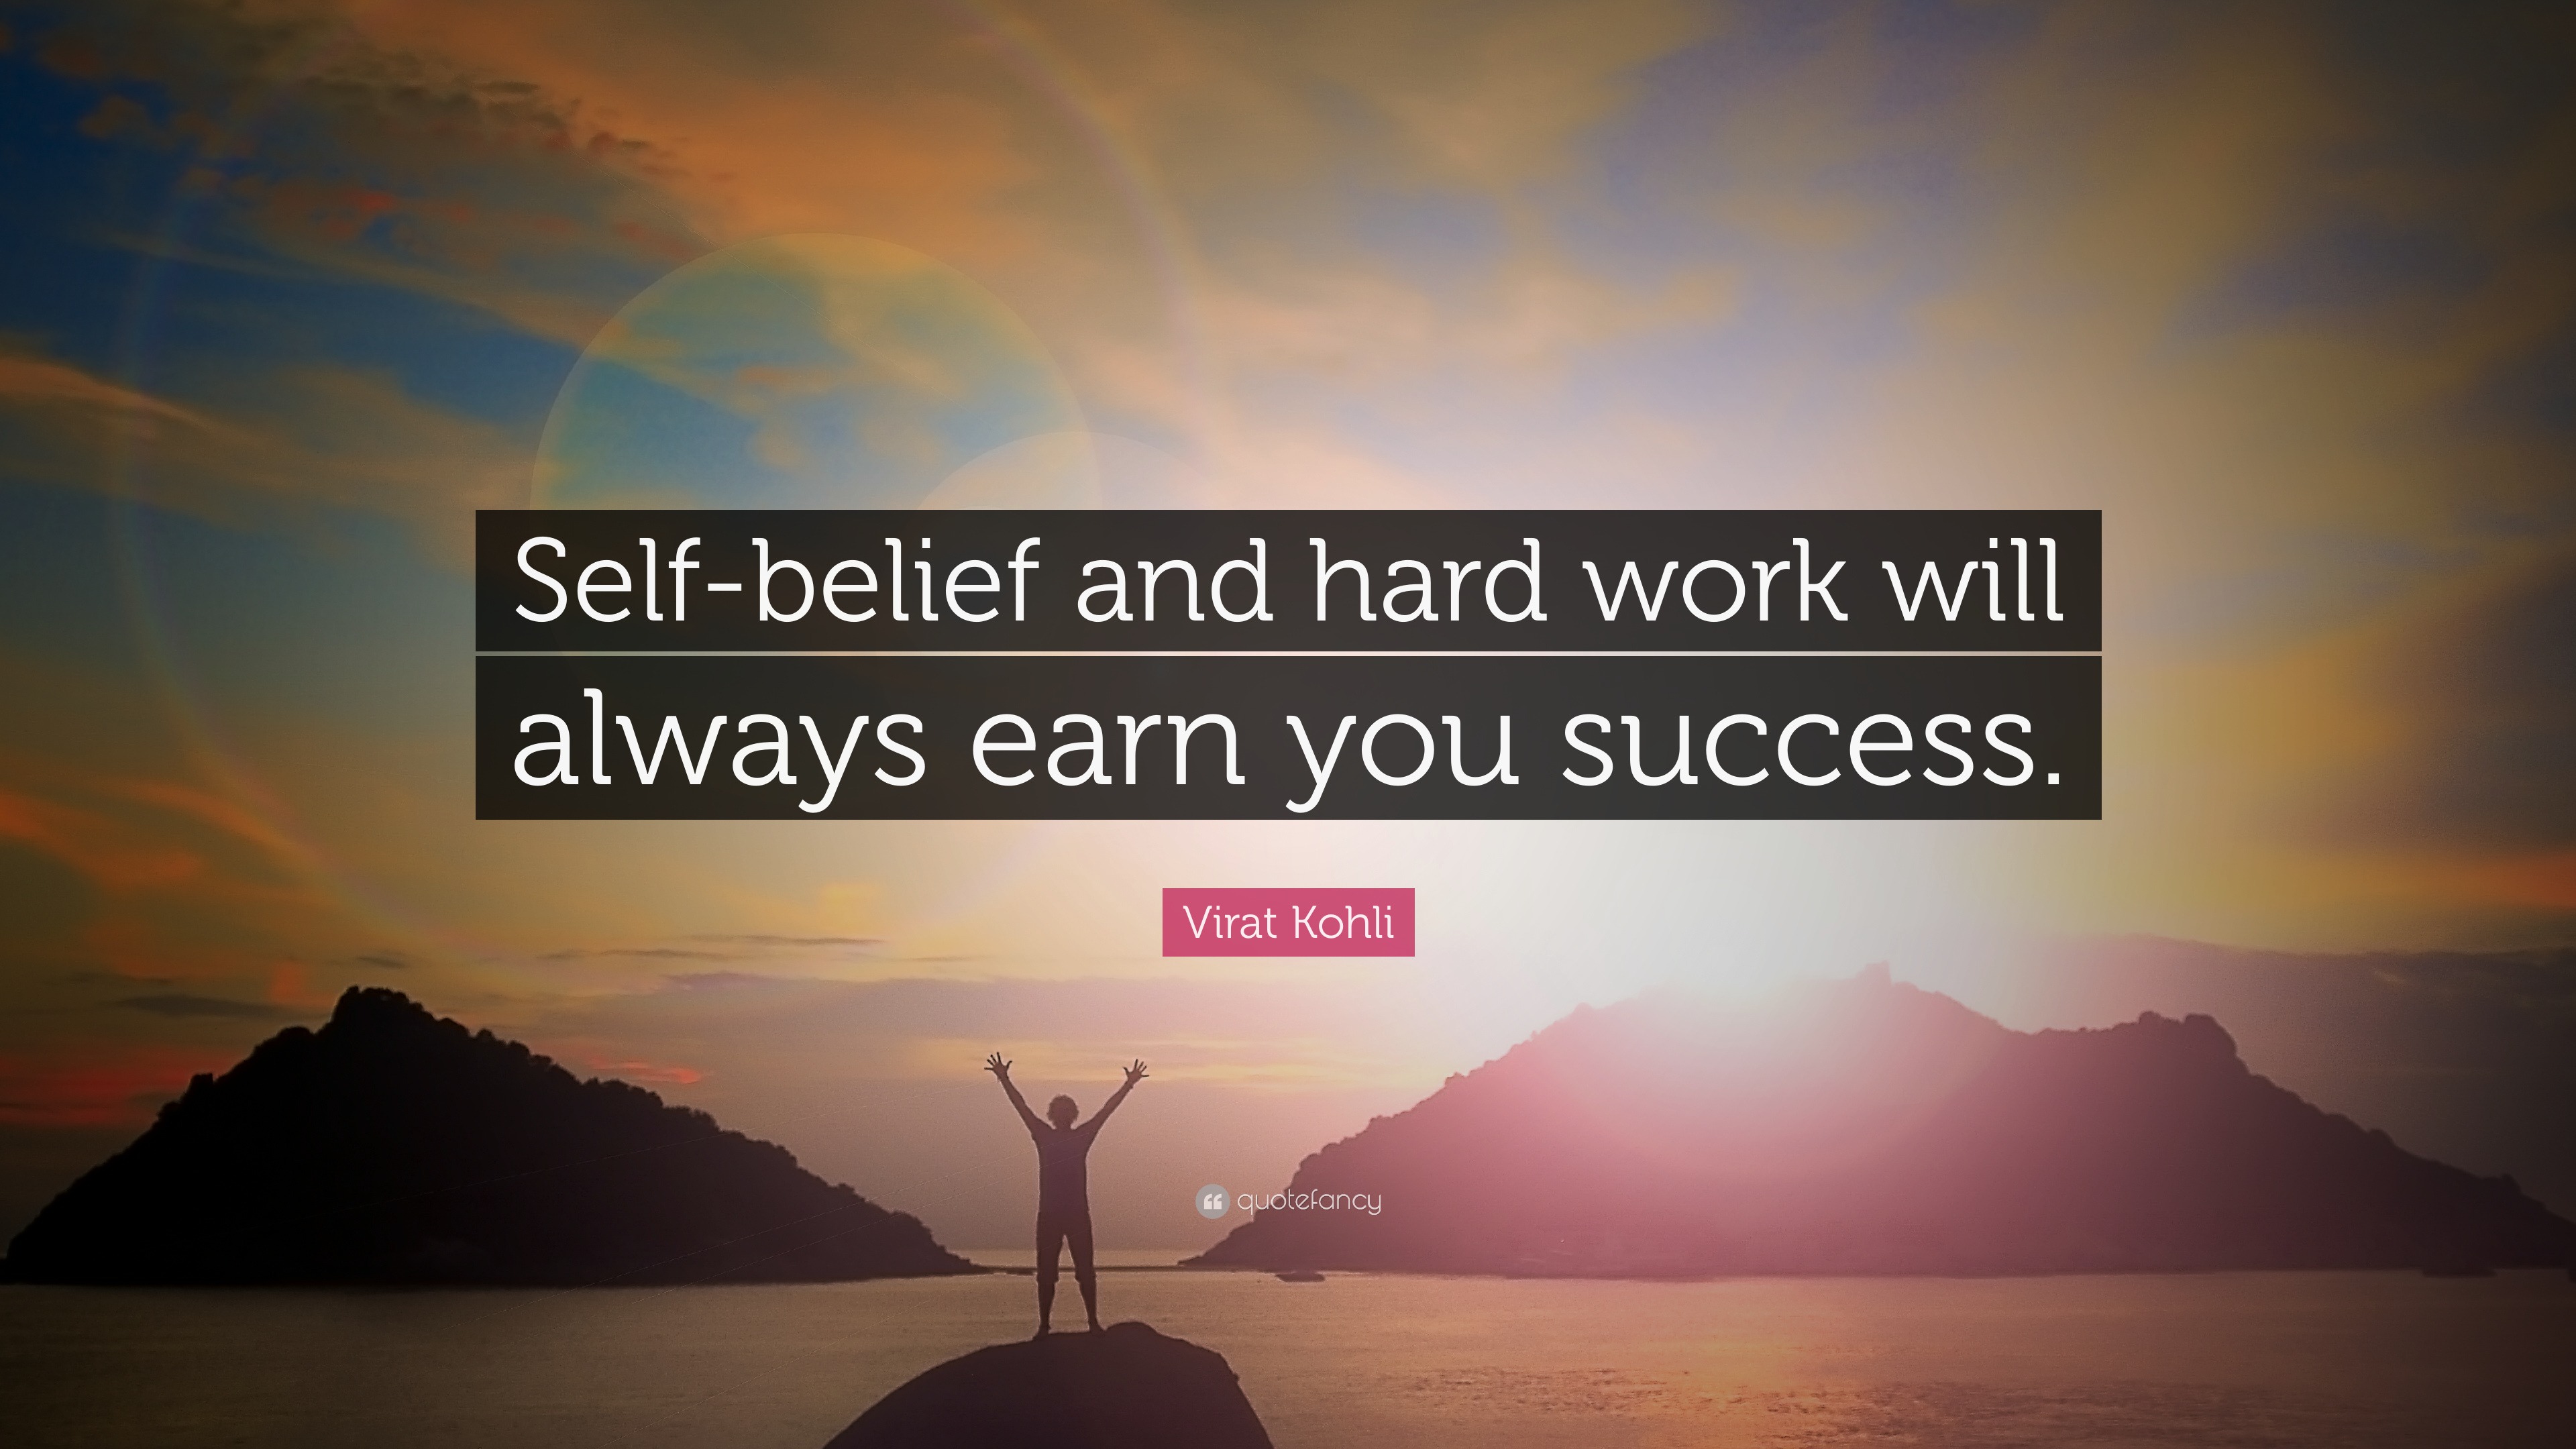 Virat Kohli Quote: “Self-belief and hard work will always earn you ...